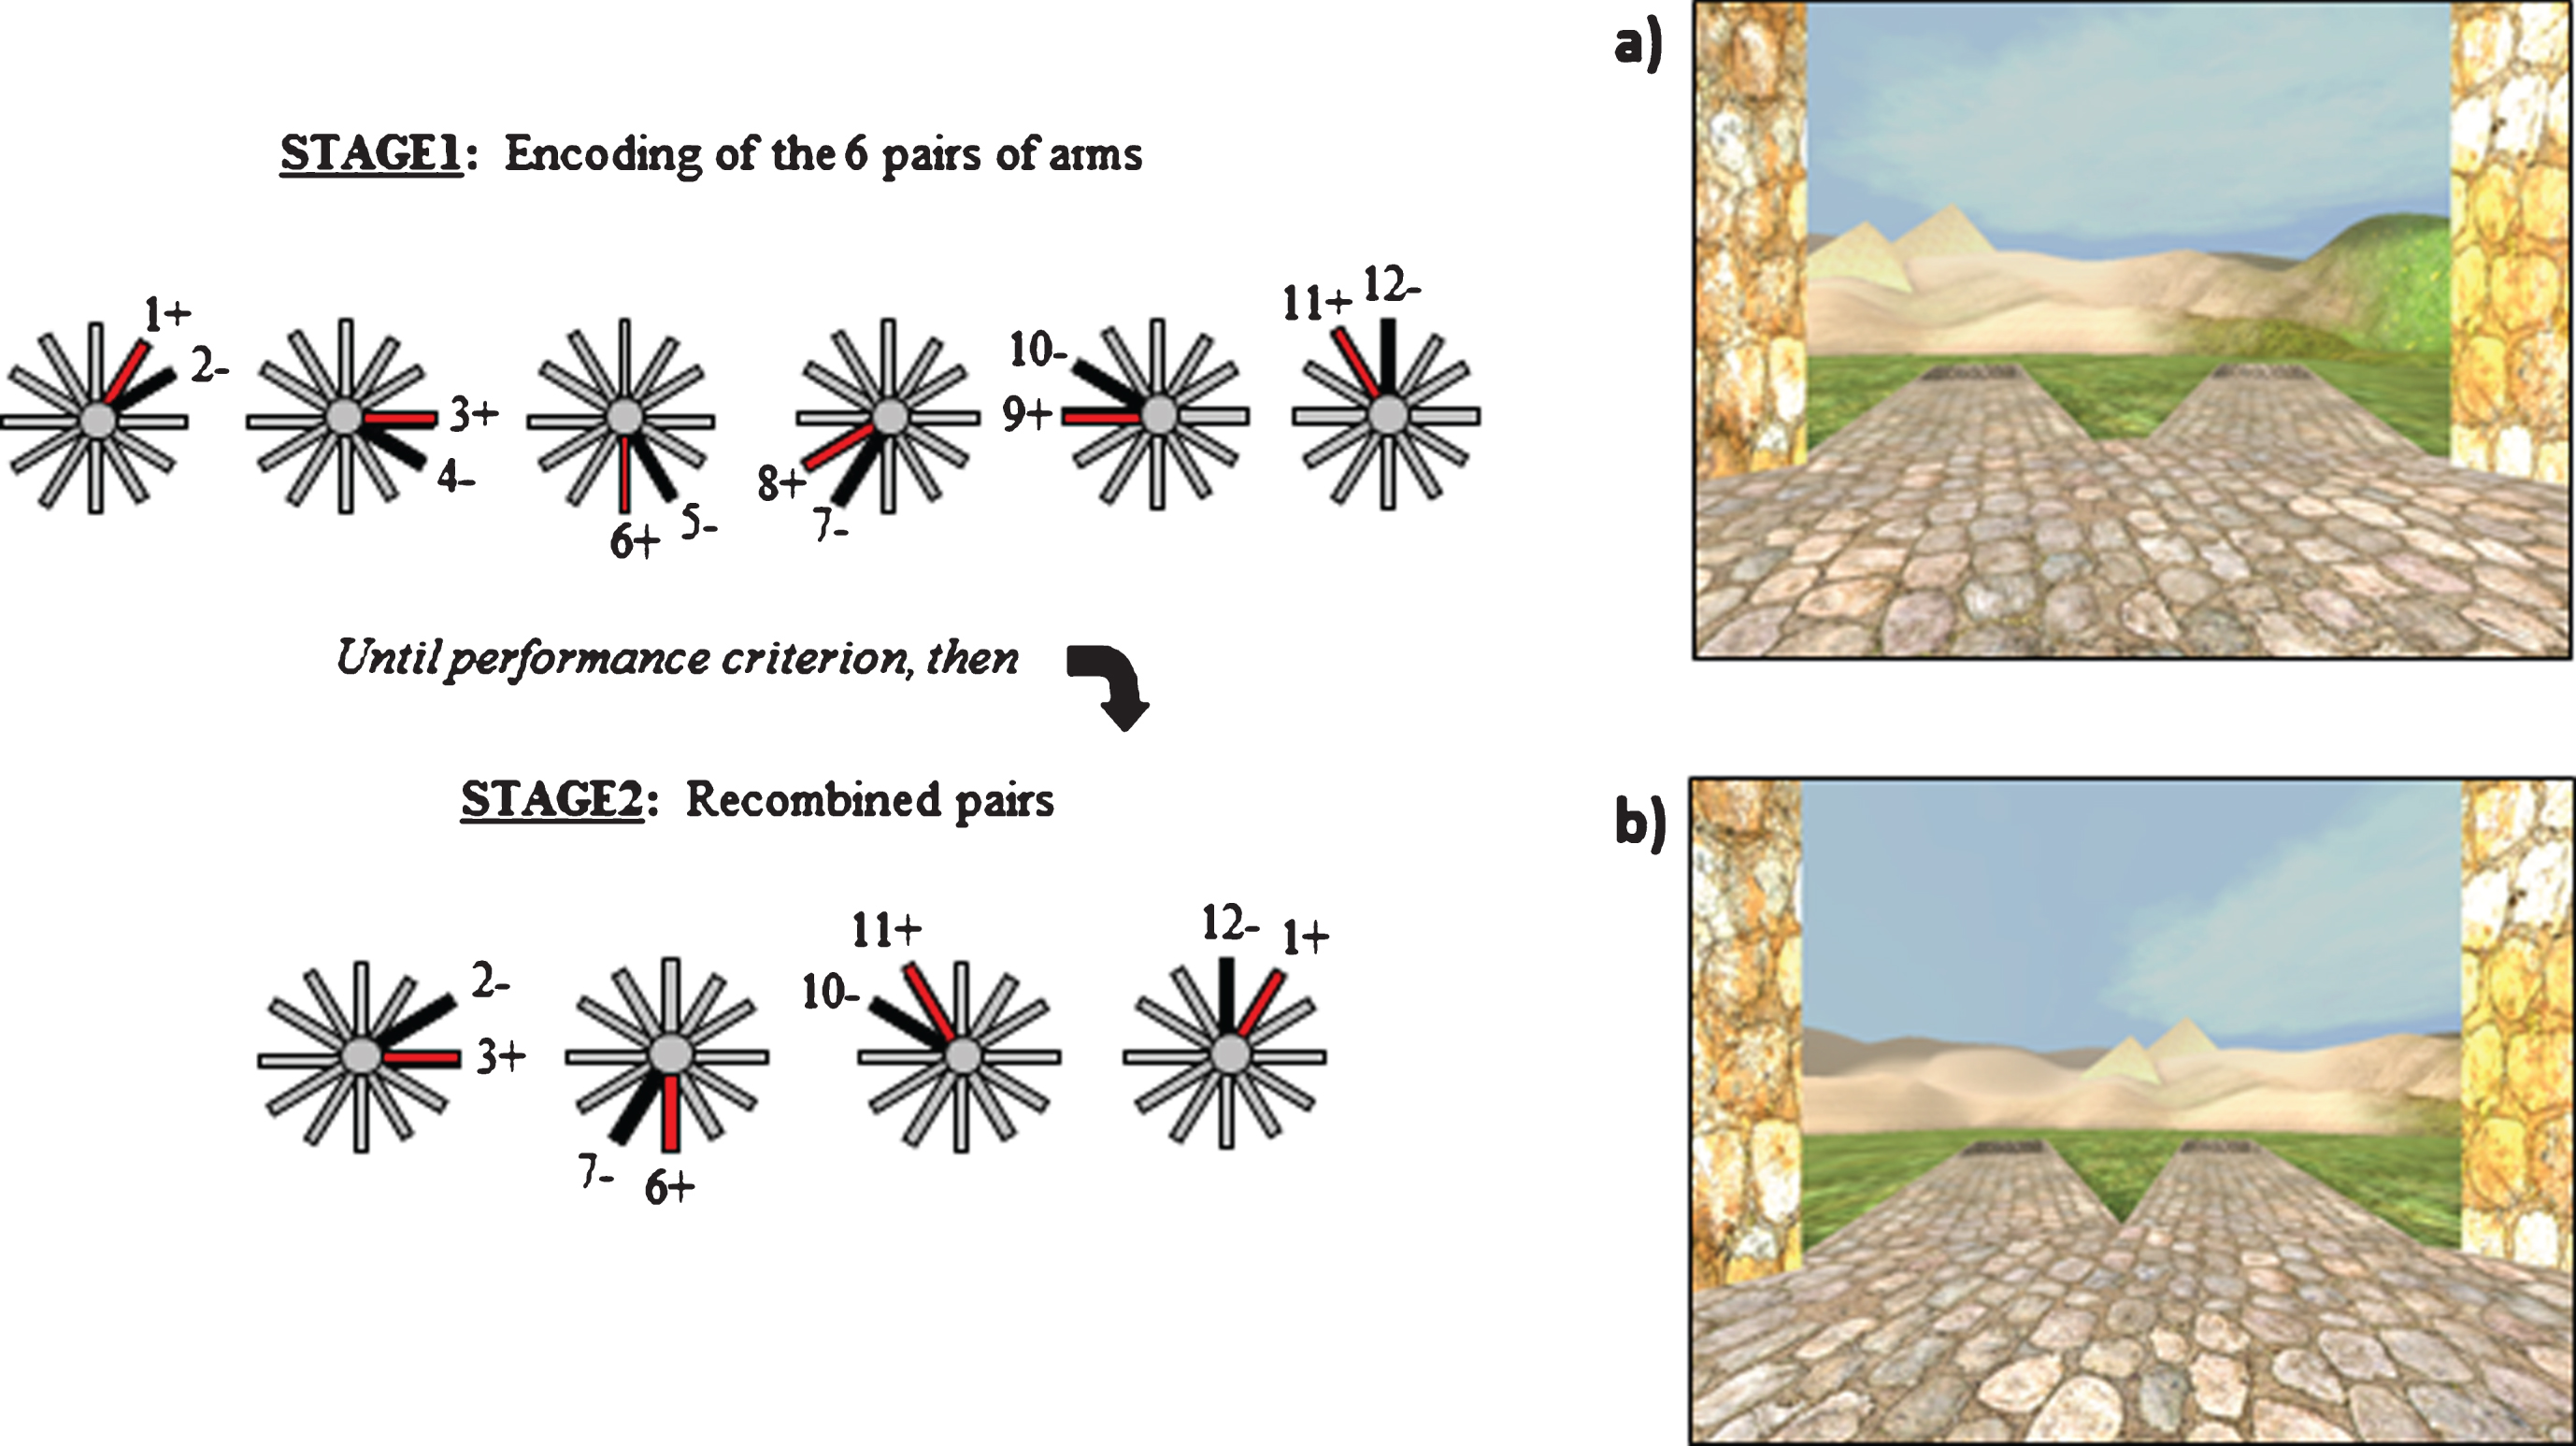 The two stages of the Concurrent Spatial Discrimination Learning Task (CSDLT) with a schematic representation of the behavioral paradigm. The CSDLT is a virtual 12-arm radial maze in which participants must learn the location of objects within six pairs of pathways using either a spatial or response strategy. a) Example of a pair of pathways presented during the learning phase where the target object would be found next to the pyramid (Stage 1). After the participants learn the location of the objects to criterion (11/12 correct choices) in 6 pairs of pathways, a probe trial is administered where the perspective shifted such that the pathways formed new pairs but the objects remain in the same locations. b) Example of a recombined pair of pathways during the probe phase (Stage 2). These probe trials allow for the dissociation of those who used a spatial strategy from those who used a response strategy. Individuals who used a spatial strategy will find target locations despite the new pairing of pathways and the change in perspective (e.g., they will take the pathway slightly to the right of the pyramids). On the other hand, older adults who used a response strategy during acquisition (e.g., when I see pyramids take a left) will make errors on the probe trial because the stimulus-response association will lead them to the incorrect pathway (e.g., when I see the pyramids, take a left).